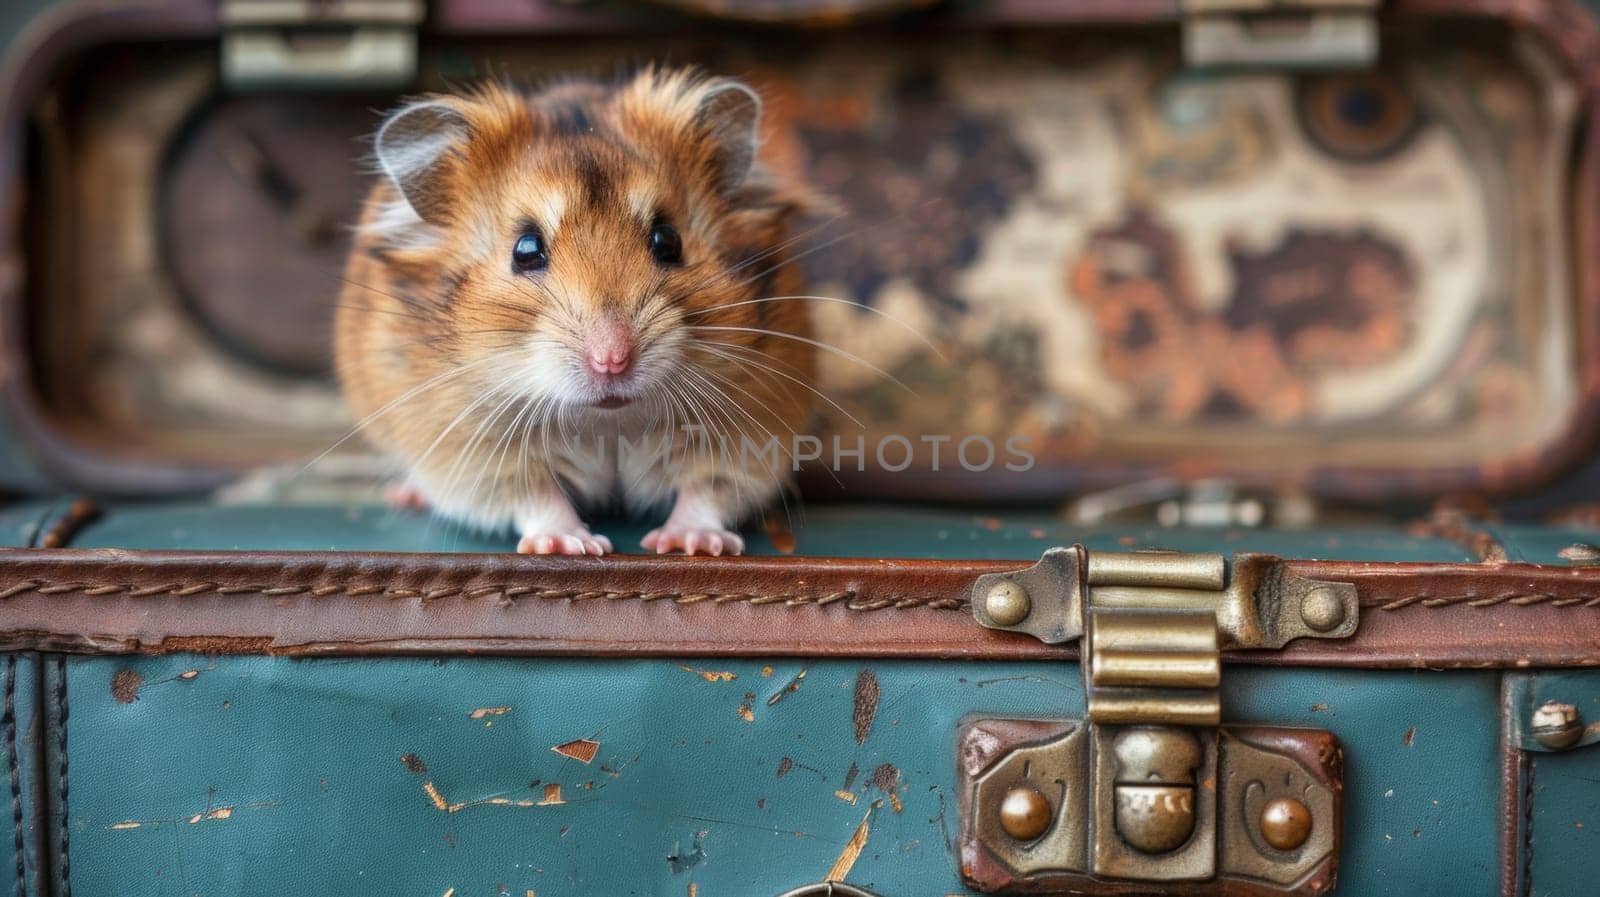 A small brown and white hamster sitting on top of a suitcase